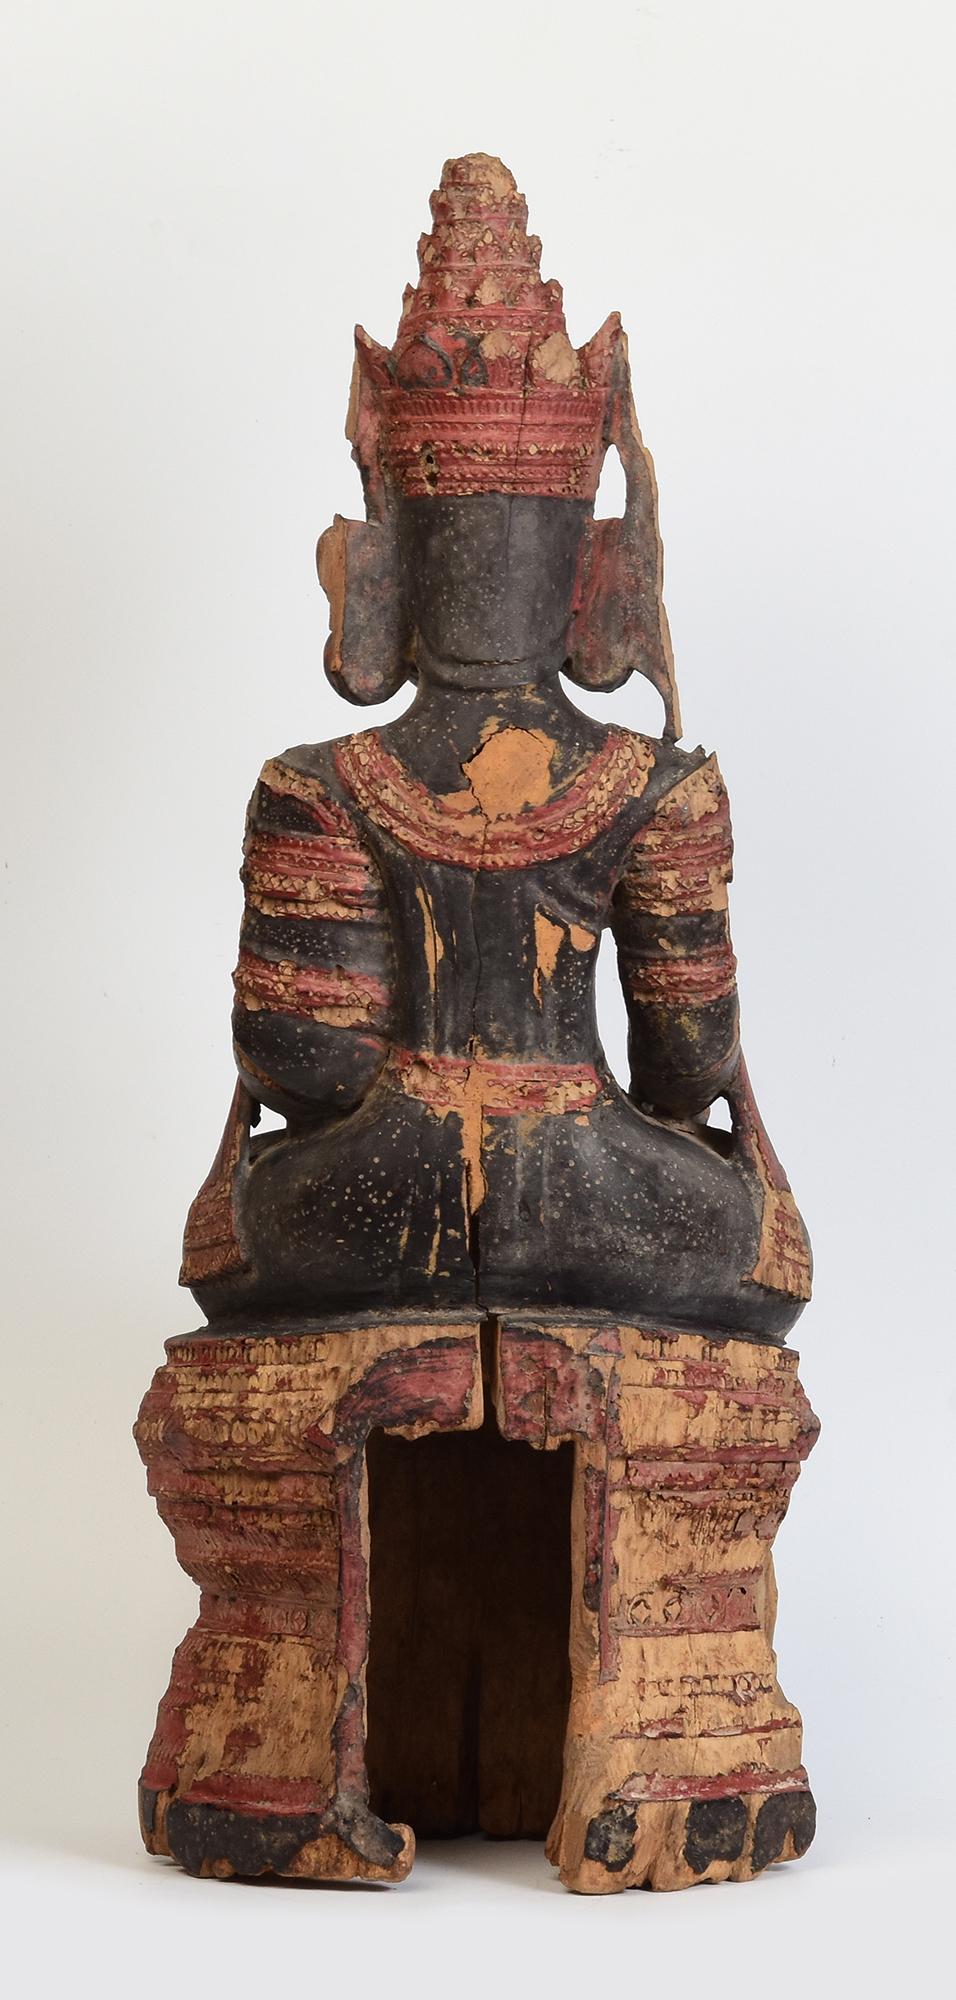 16th Century, Ava, Rare Antique Burmese Wooden Seated Crowned Buddha For Sale 5